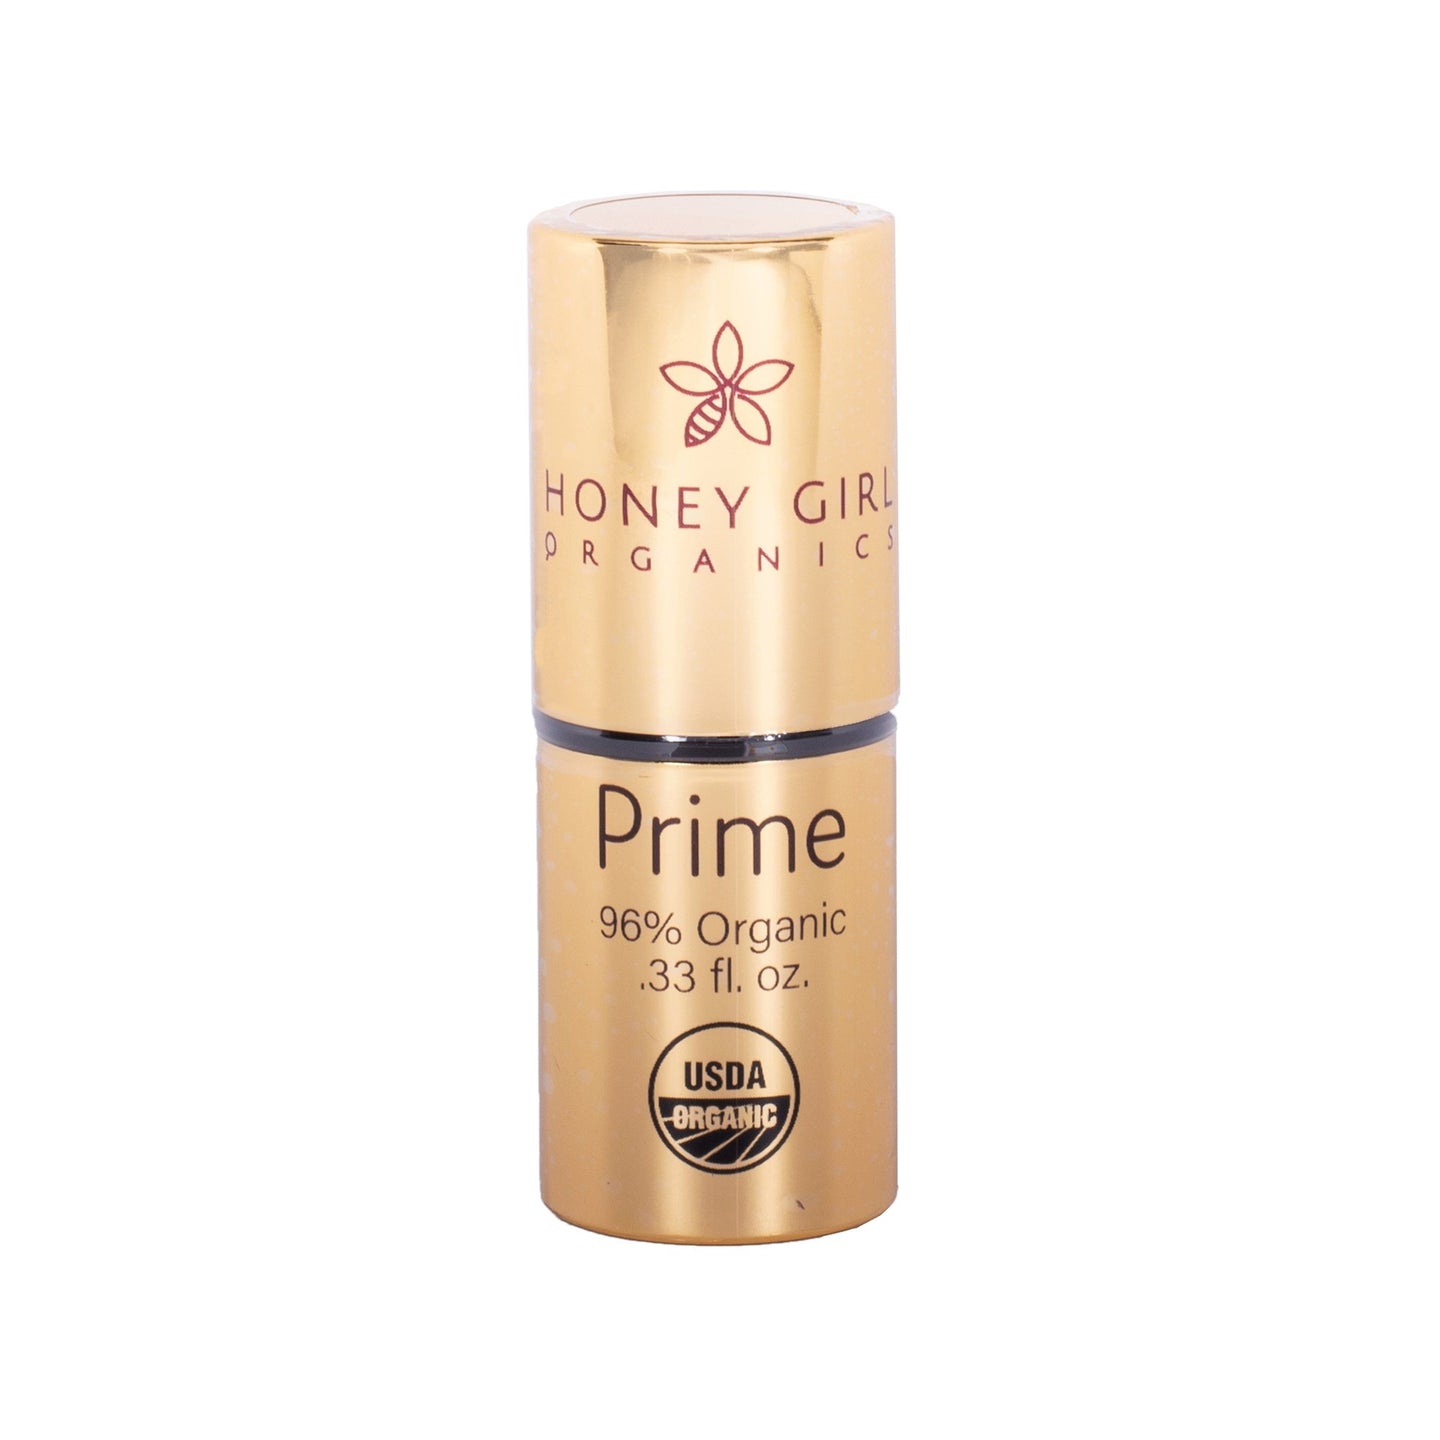 Shop Makeup Primer by Honey Girl Organics - Let's make it a trend #explorebeautiful face and makesup primers